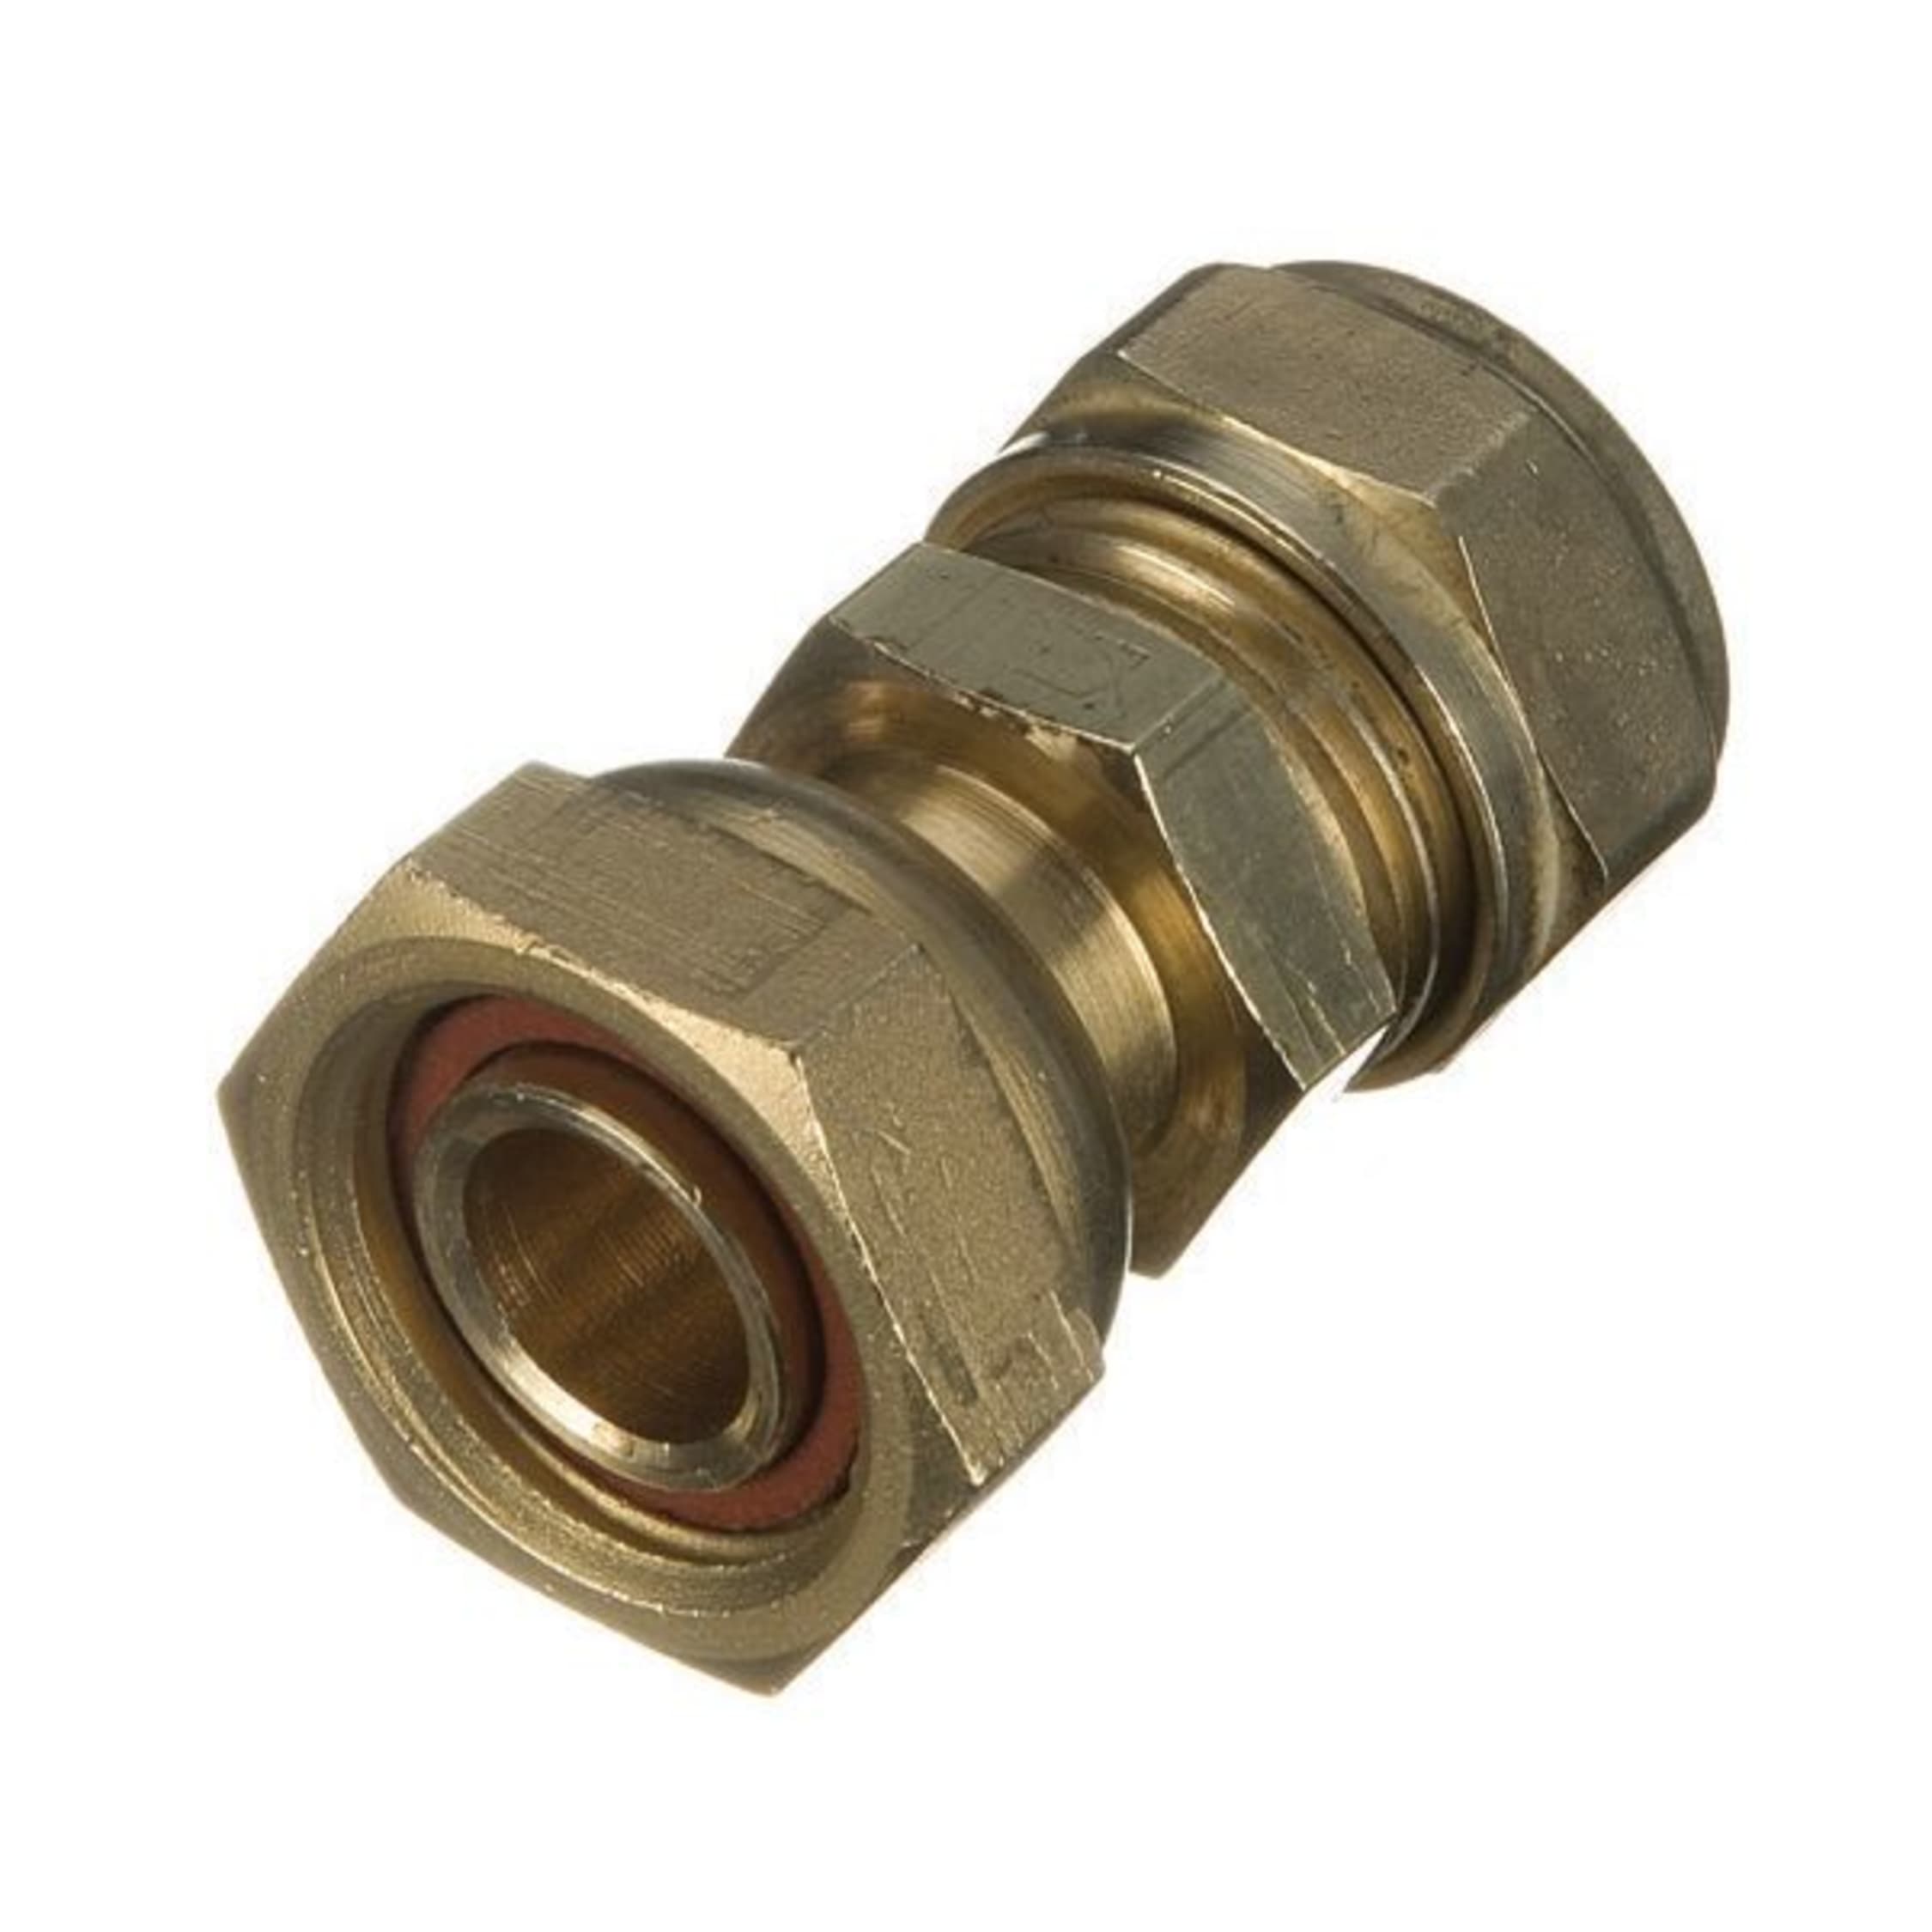 Compression Bent Tap Connector 15mm x 1/2" Chromed 